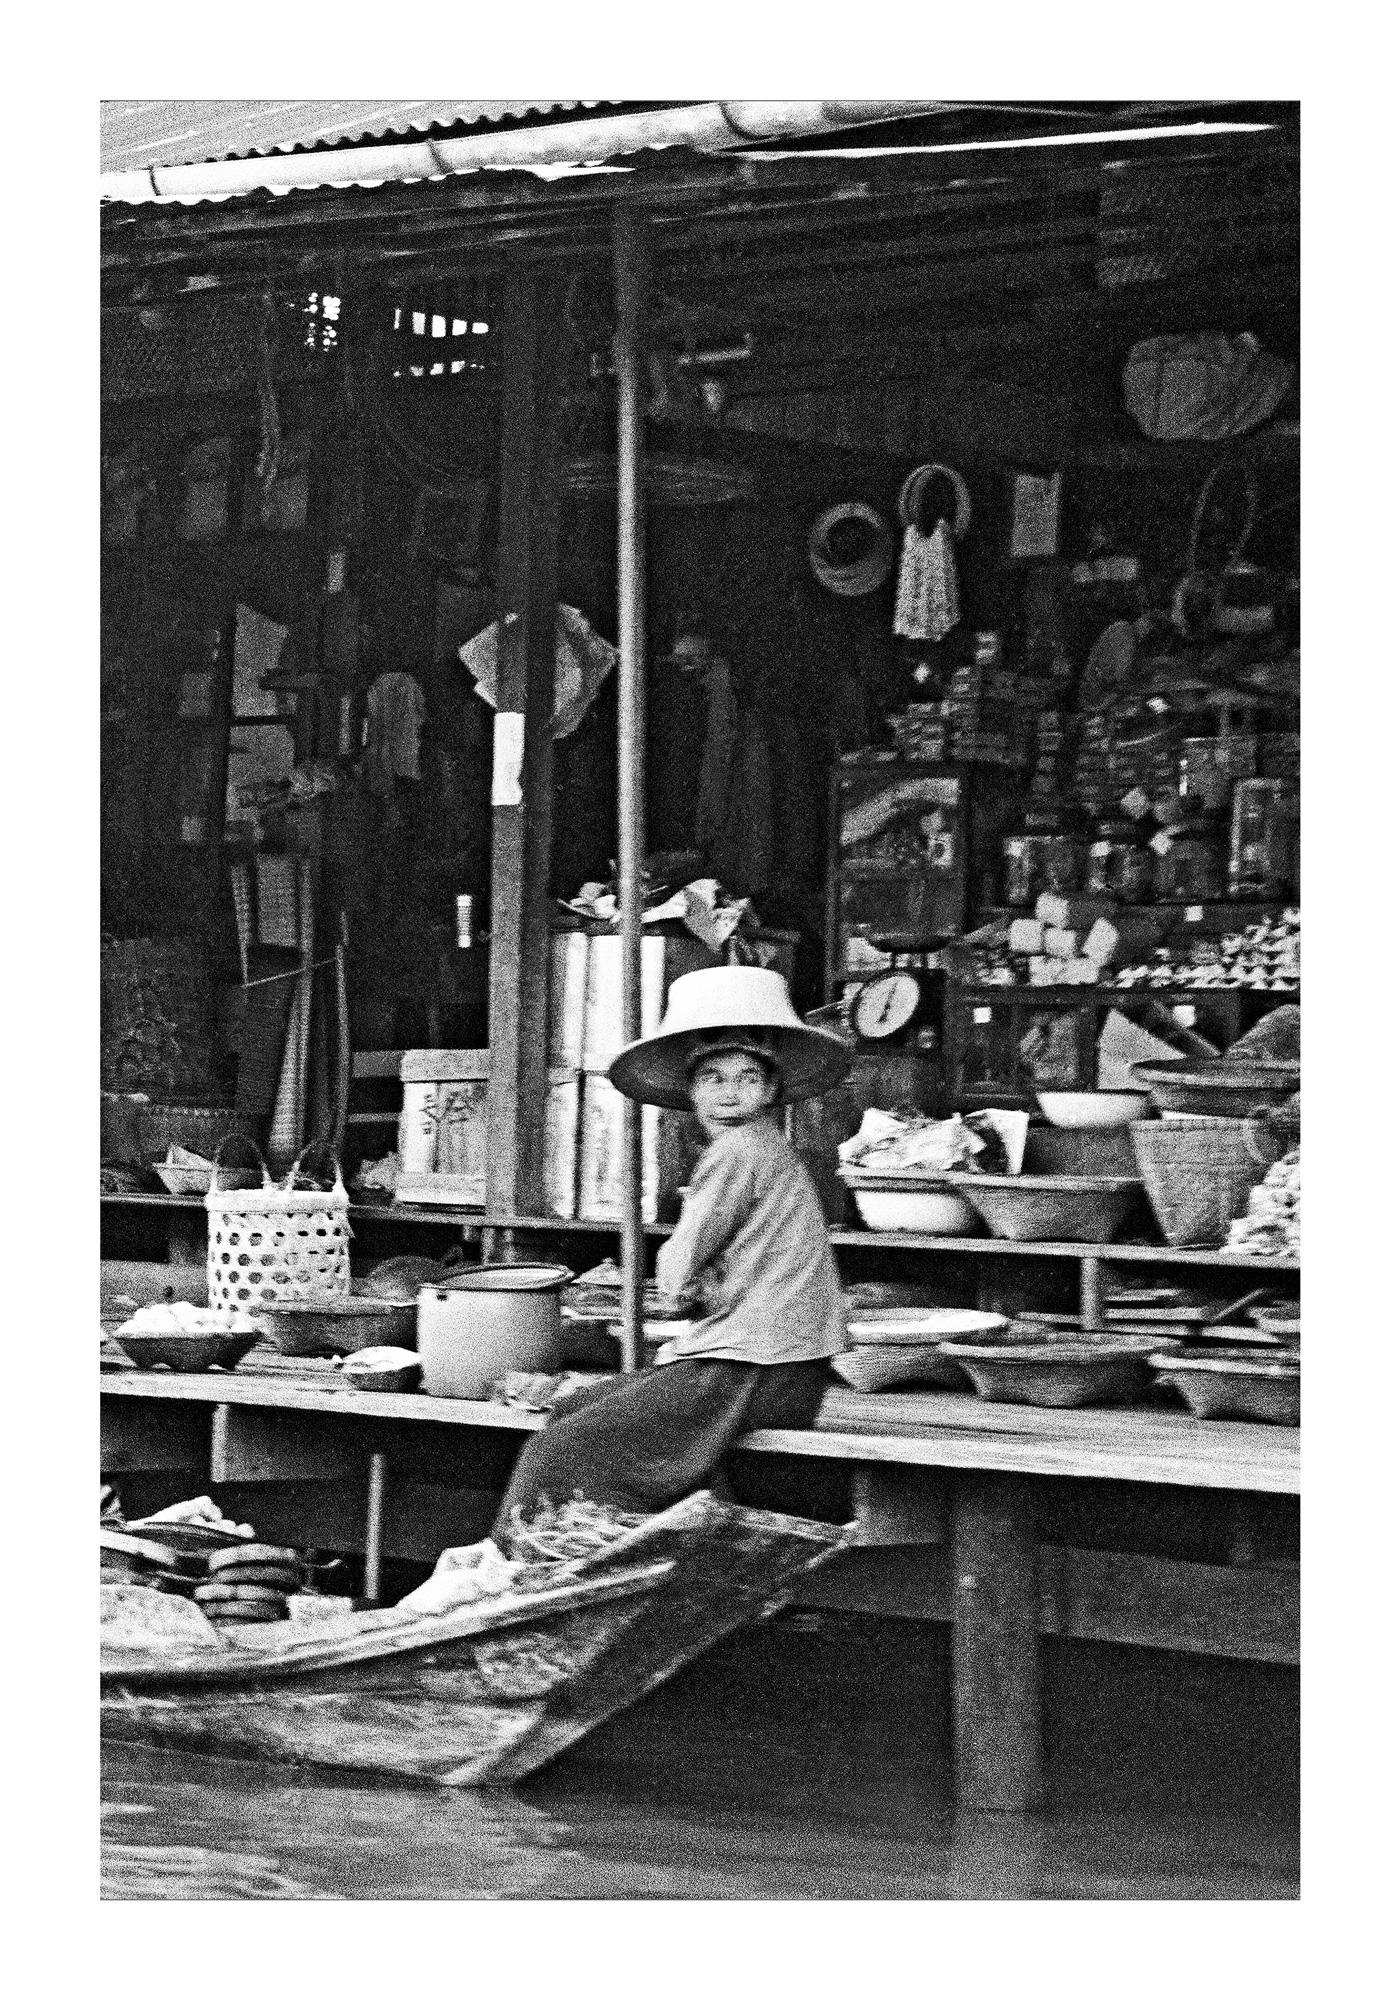 Artwork sold in perfect condition
Fabrizio La Torre’s 100th Anniversary Celebration (1921-2021) Set # 6 - Bangkok
Limited edition of 100 Coffrets for each themes, all artworks printed on fine art papers later (2020-2021) from black & white negatives